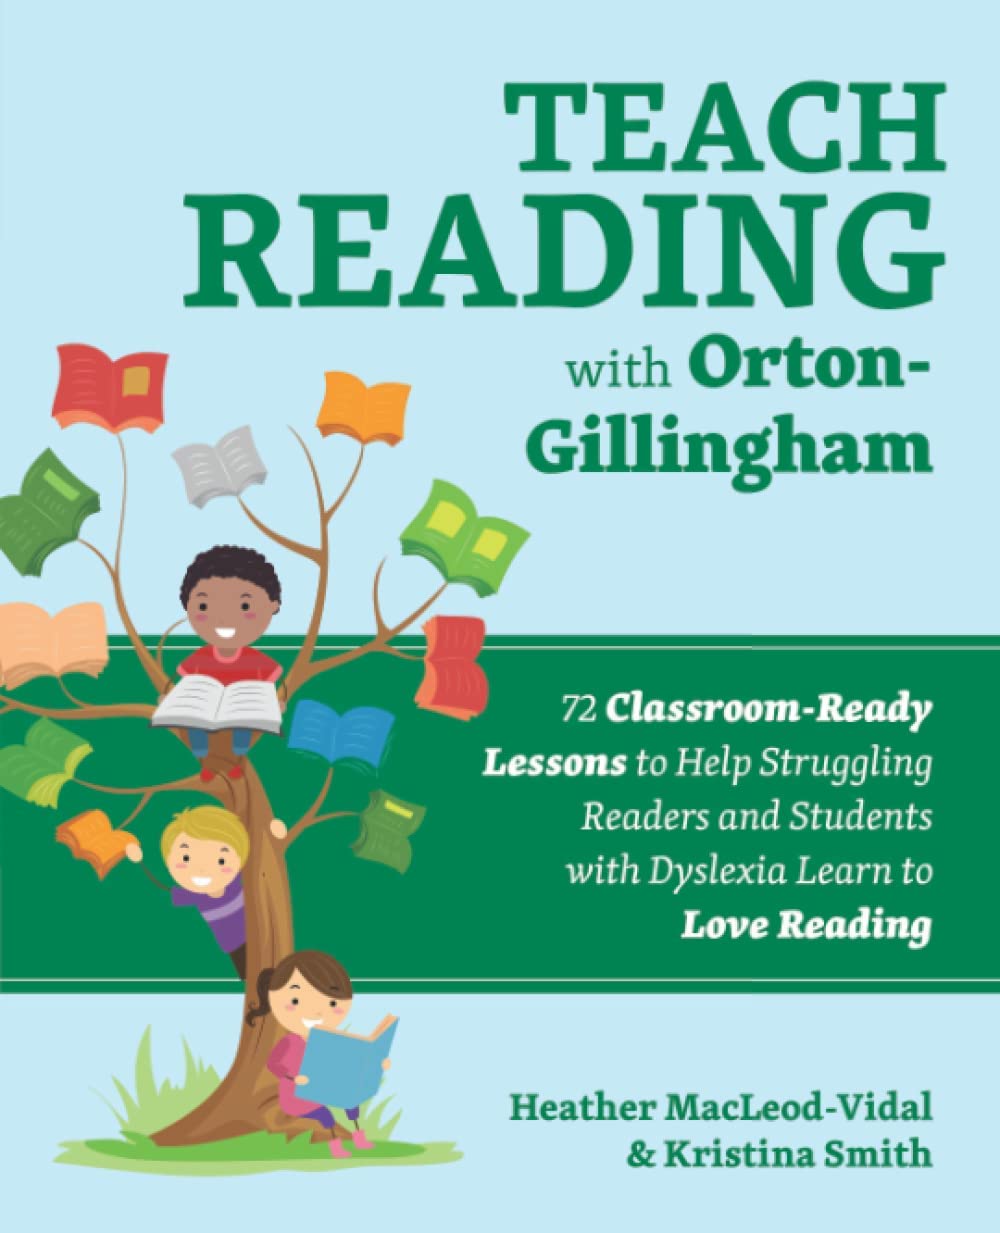 Teach Reading with Orton-Gillingham: 72 Classroom-Ready Lessons to Help Struggling Readers and Students with Dyslexia Learn to Love Reading (Books for Teachers)